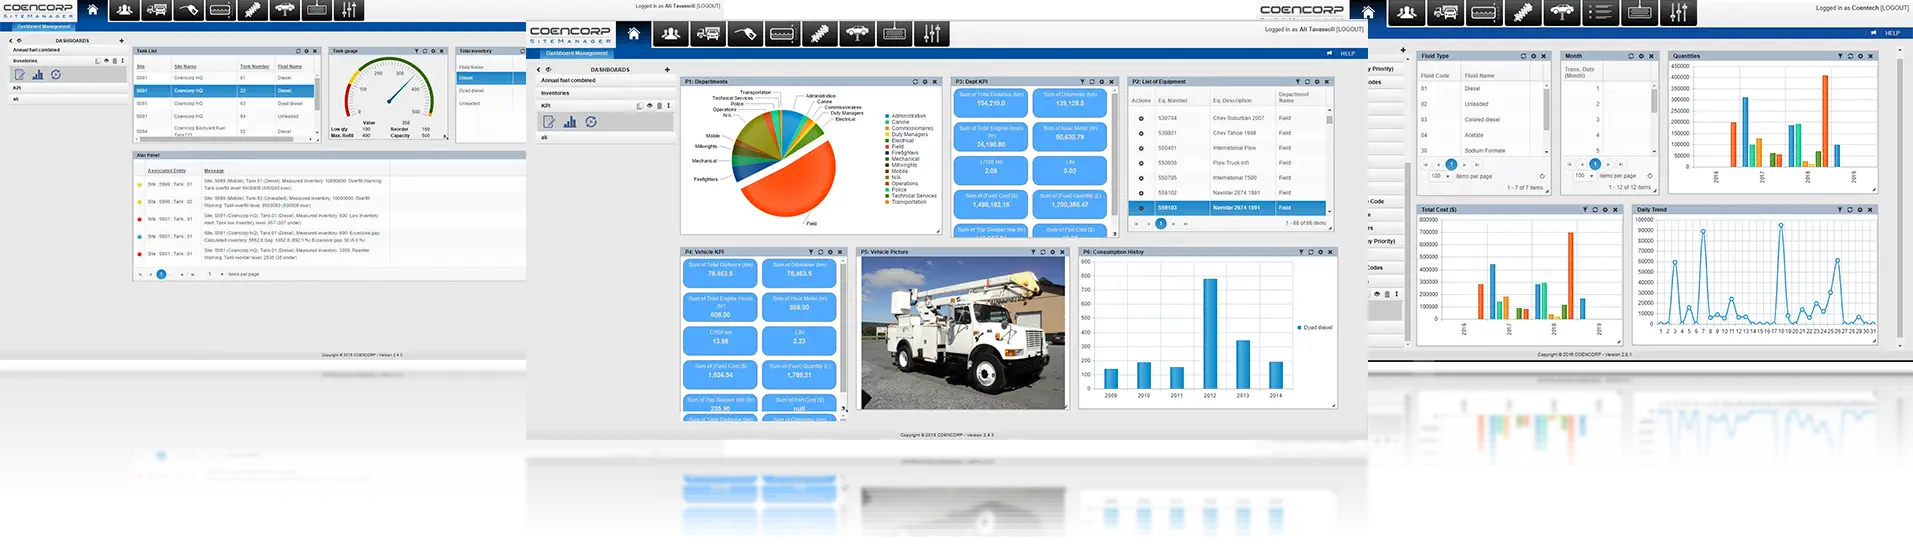 Computer screenshots showing the data collected and displayed from a Coencorp ETU fleet telematics unit.